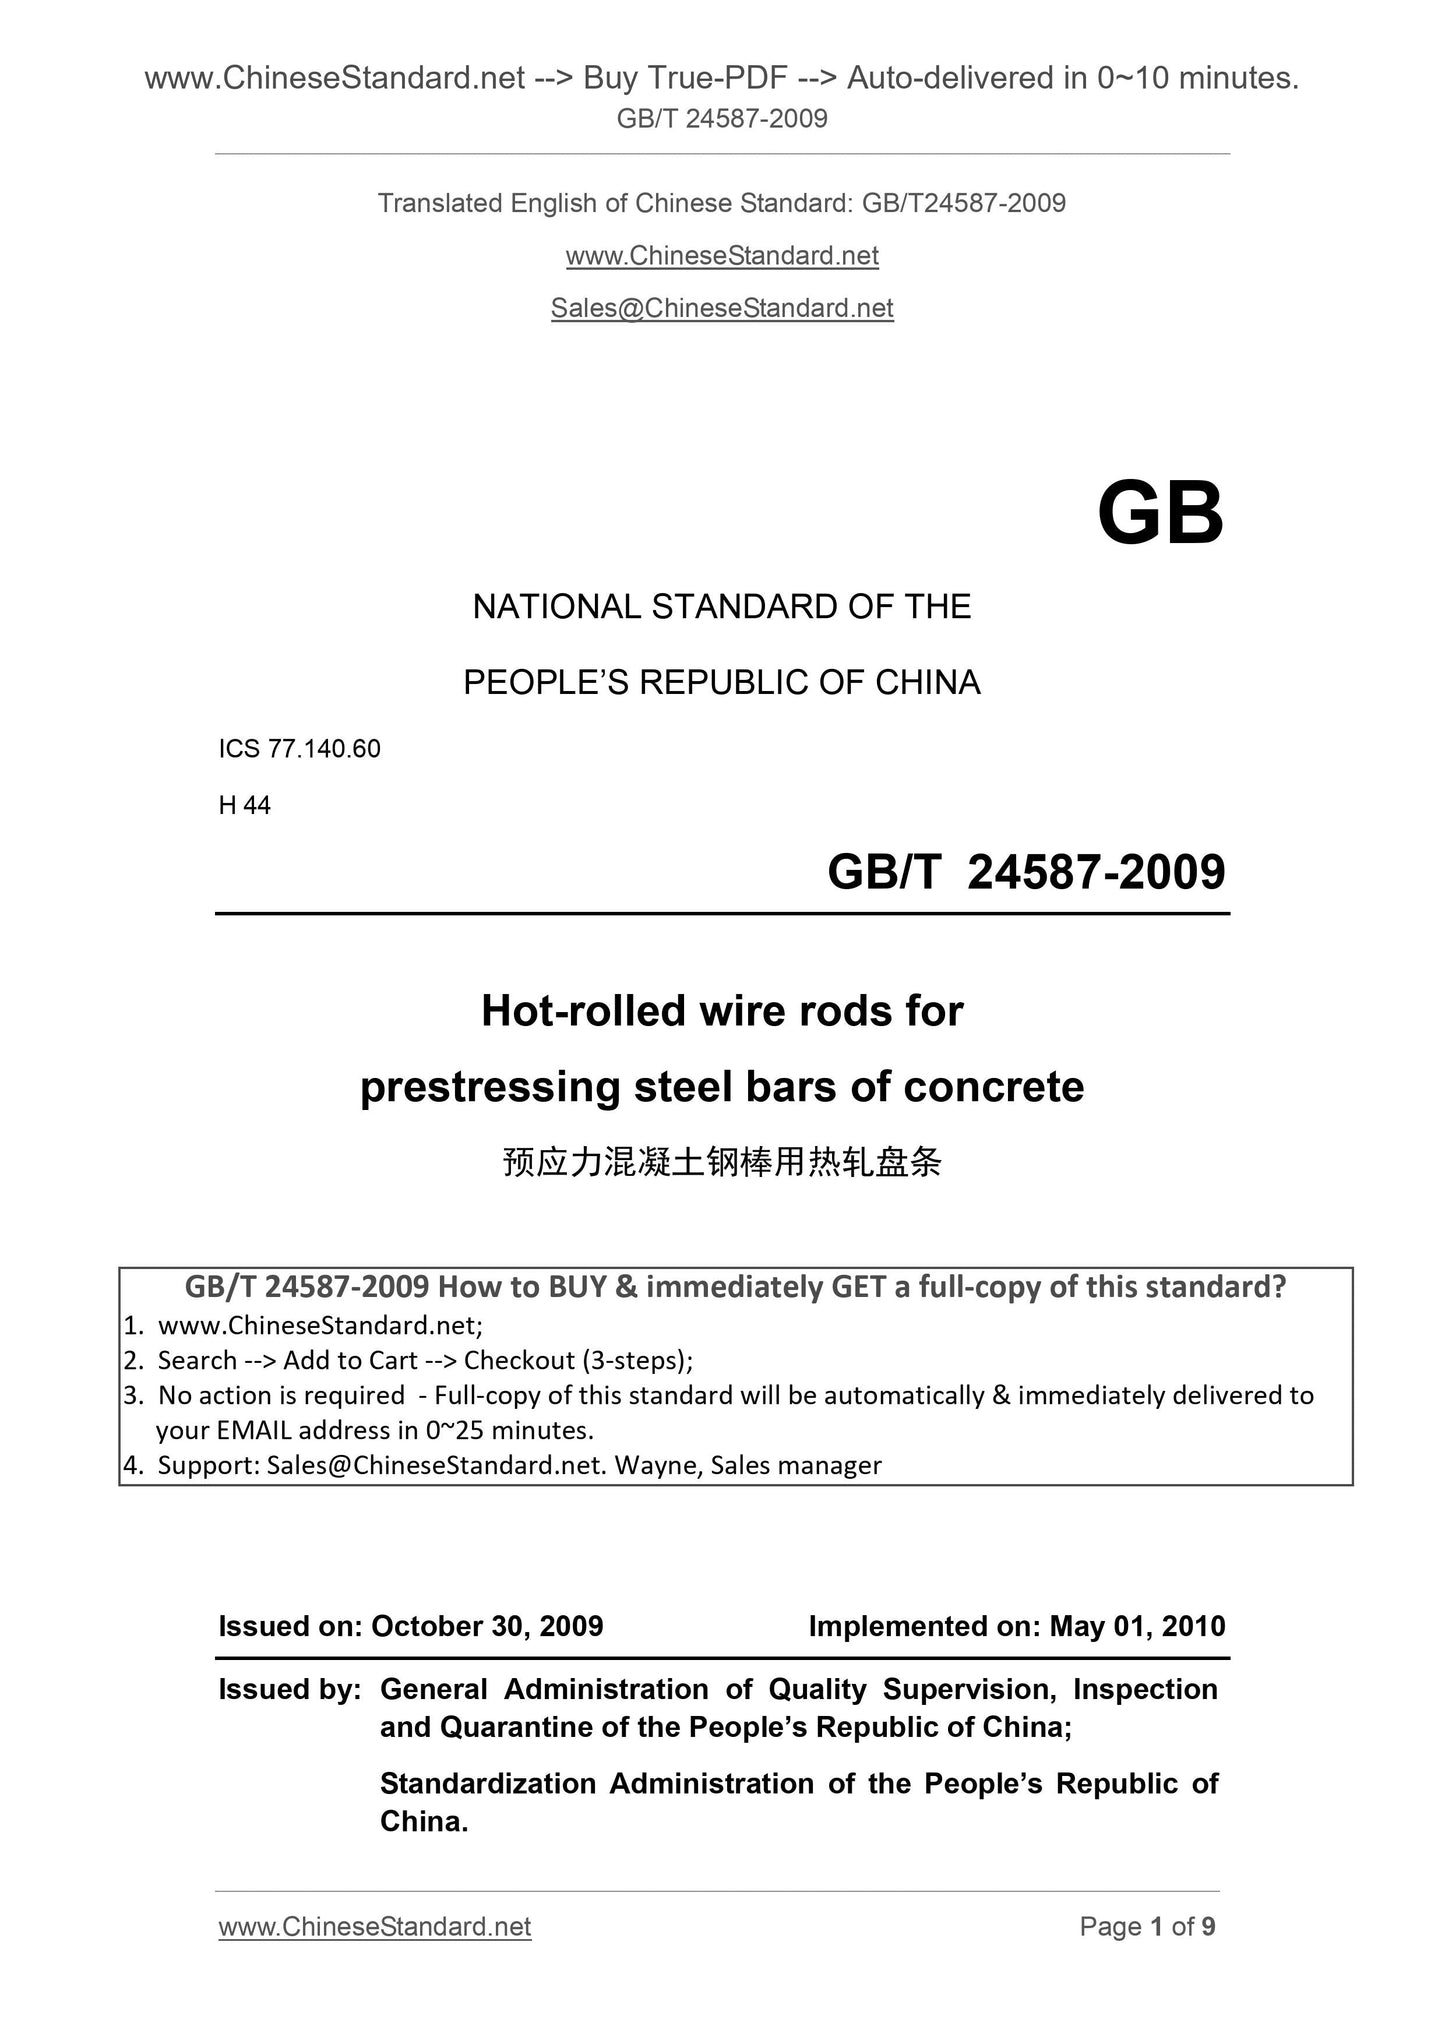 GB/T 24587-2009 Page 1